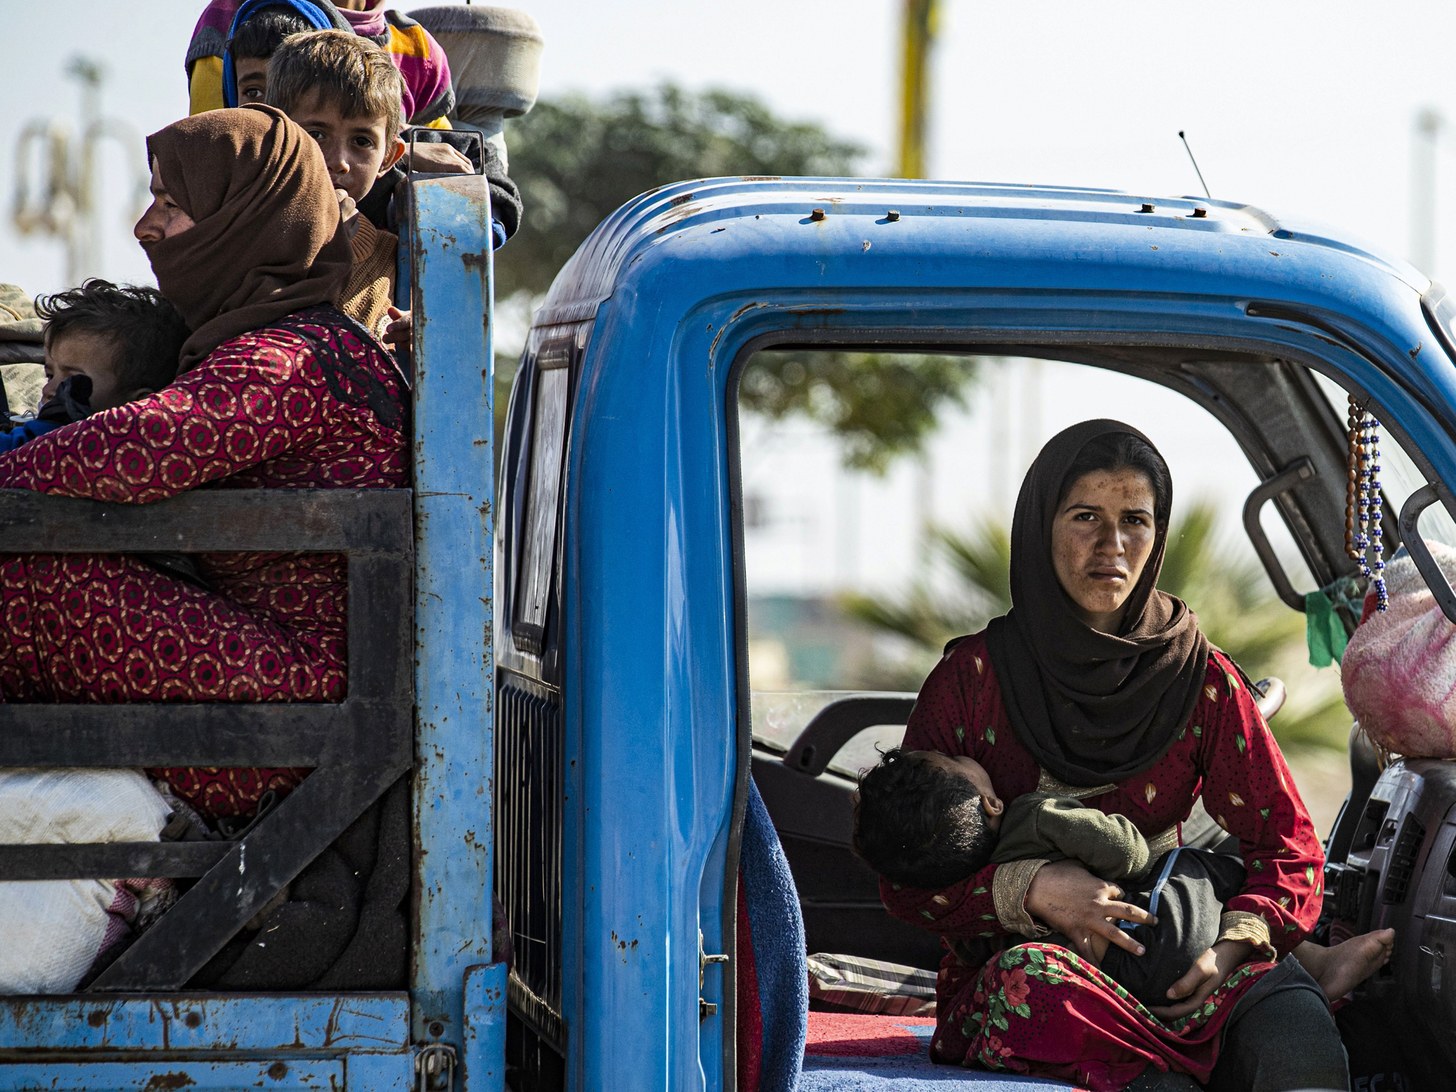 Syrian Woman in a truck with a baby